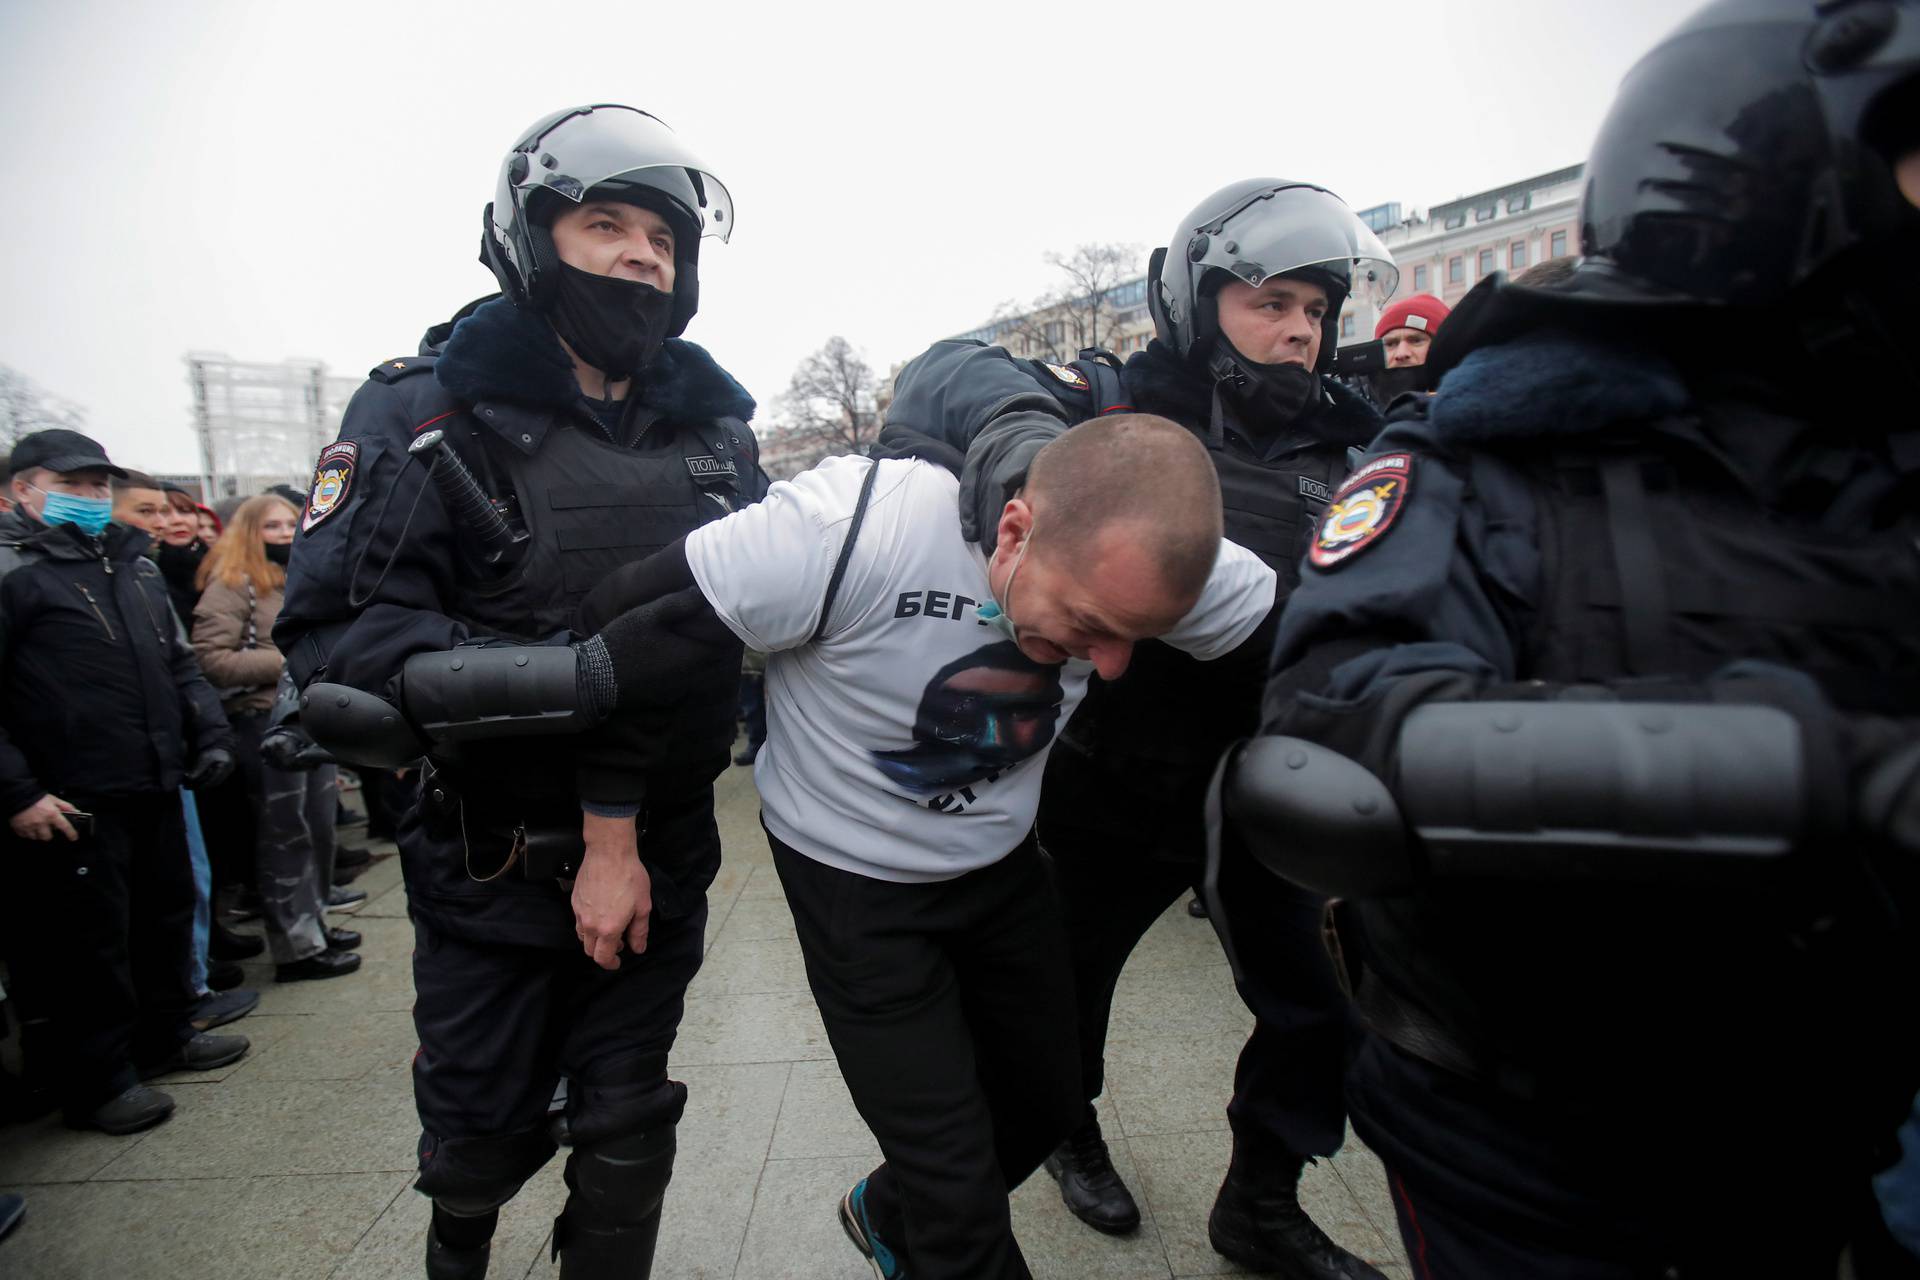 Navalny supporters protest his arrest